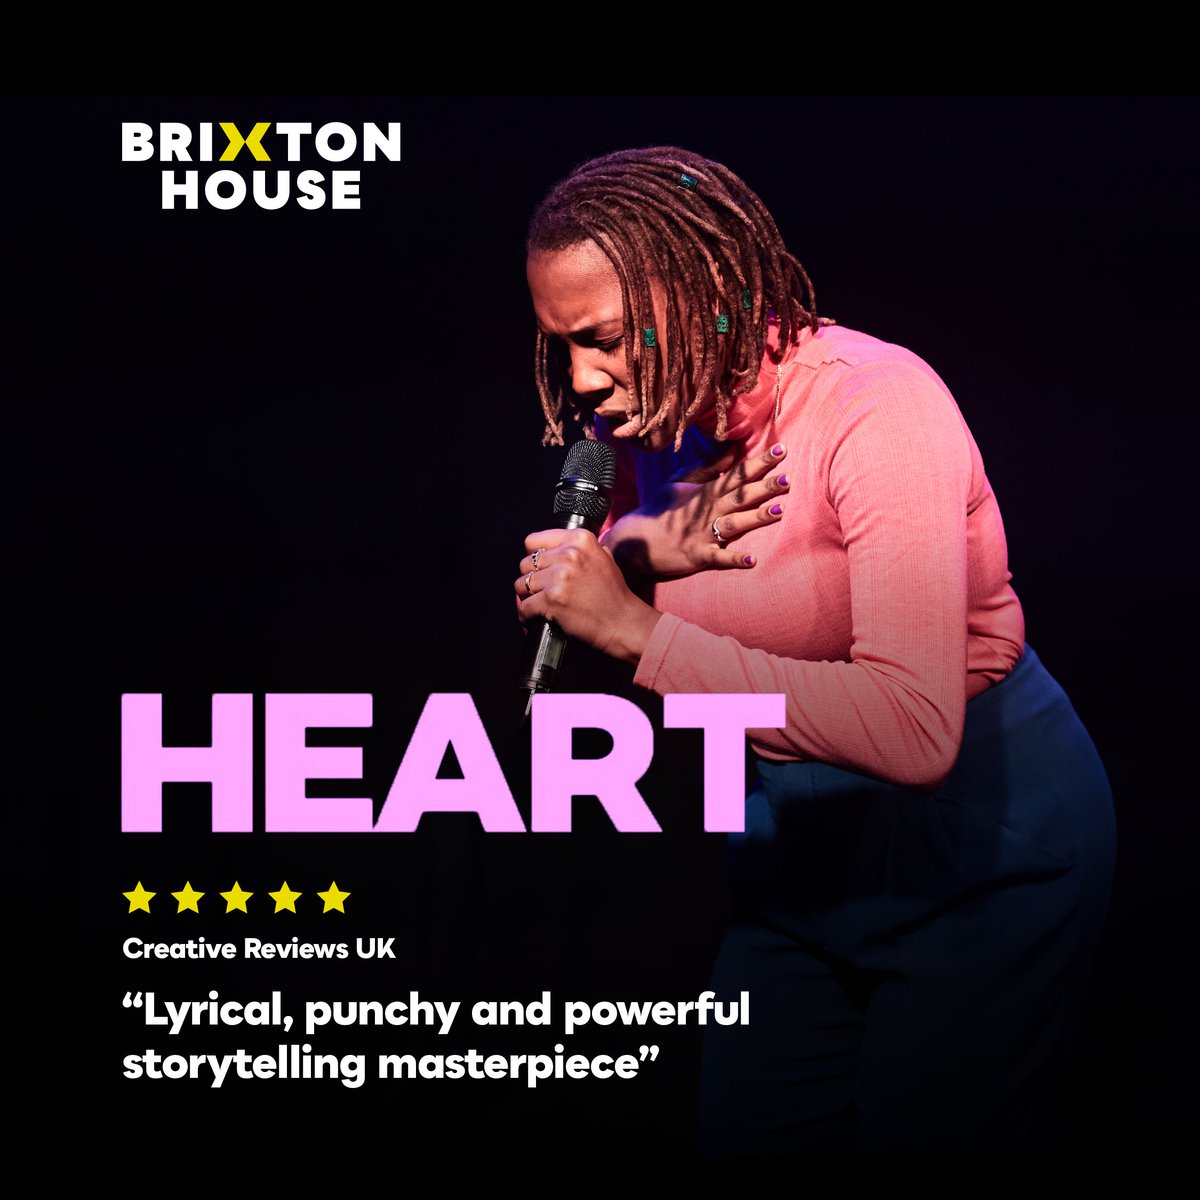 ✭✭✭✭✭ “Jade Anouka is a force of nature.” @ATDazzles Only two more performances of HEART #hearttheplay, @JadeAnouka's raw and honest debut play with live music from 4 x UK Beatbox Champion @_GraceSavage! Don't miss out ⏬ brixtonhouse.co.uk/shows/heart/